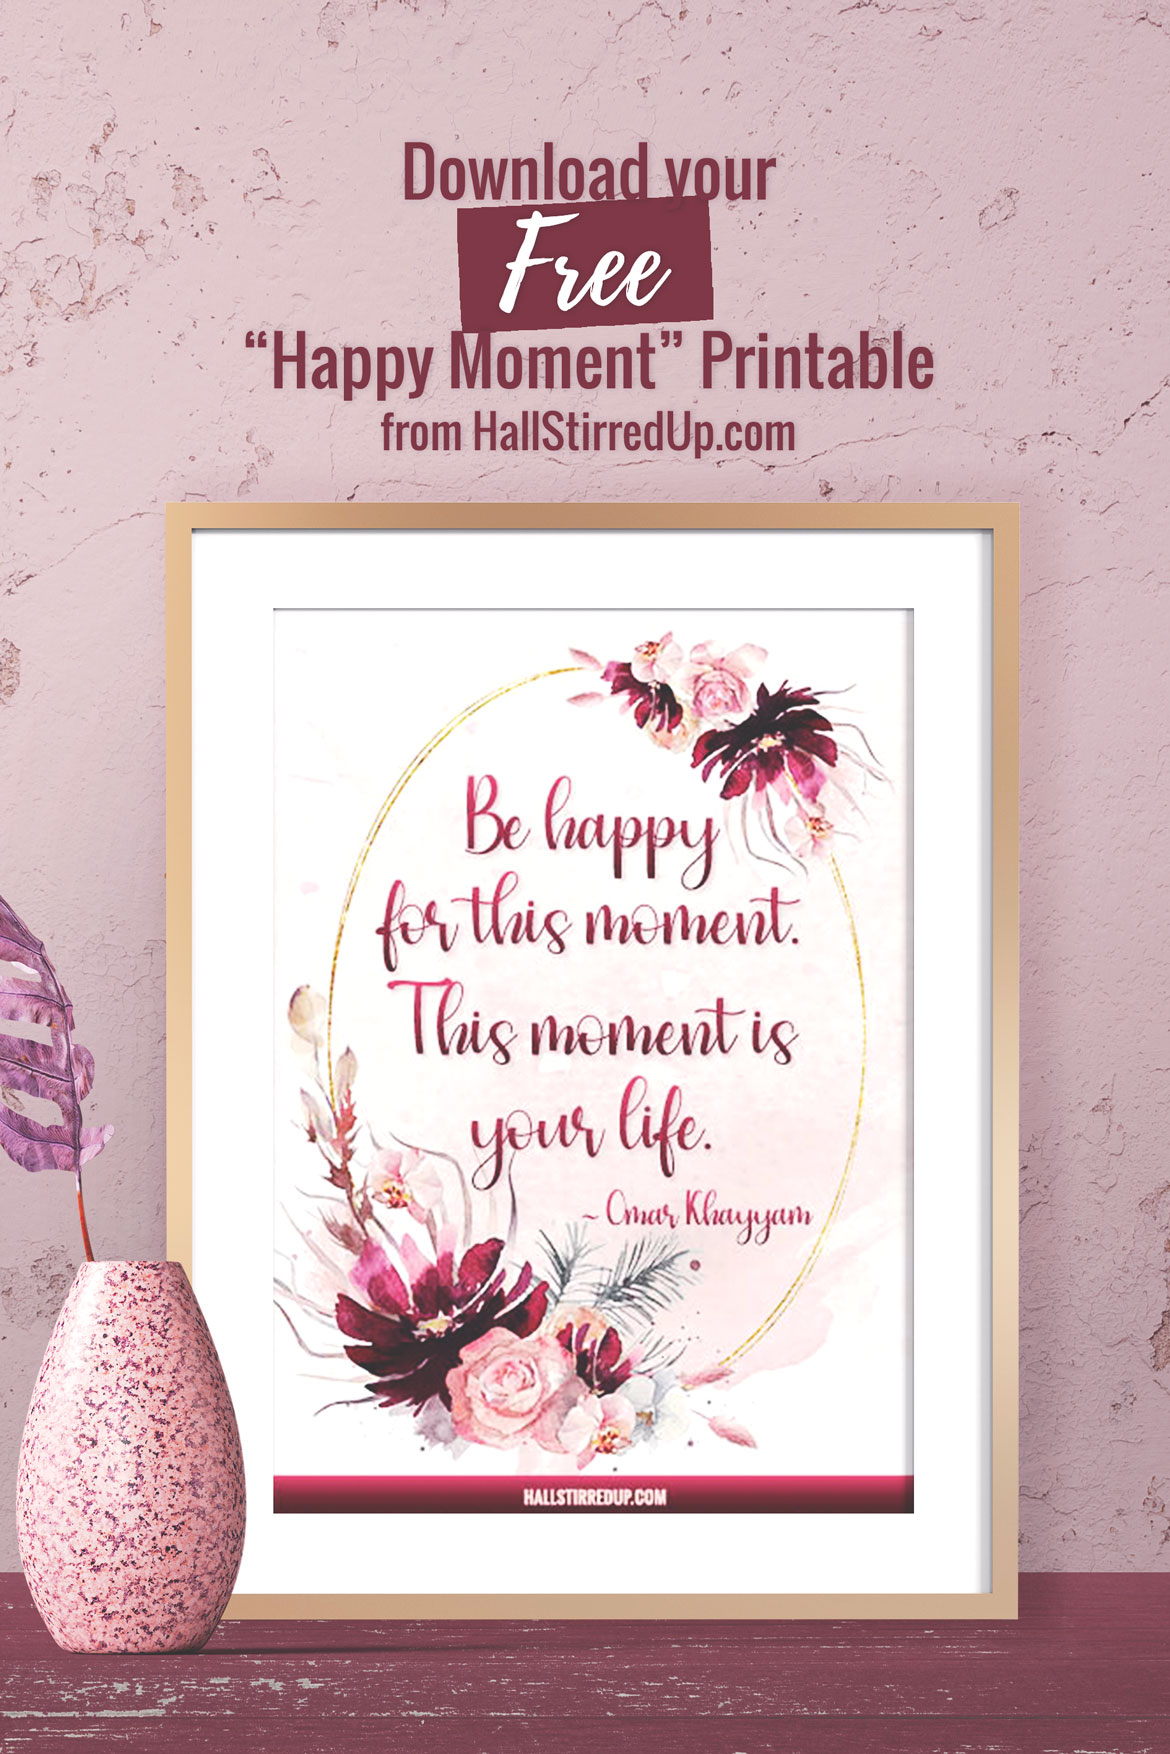 Be happy for today! Monthly Motivation includes printable